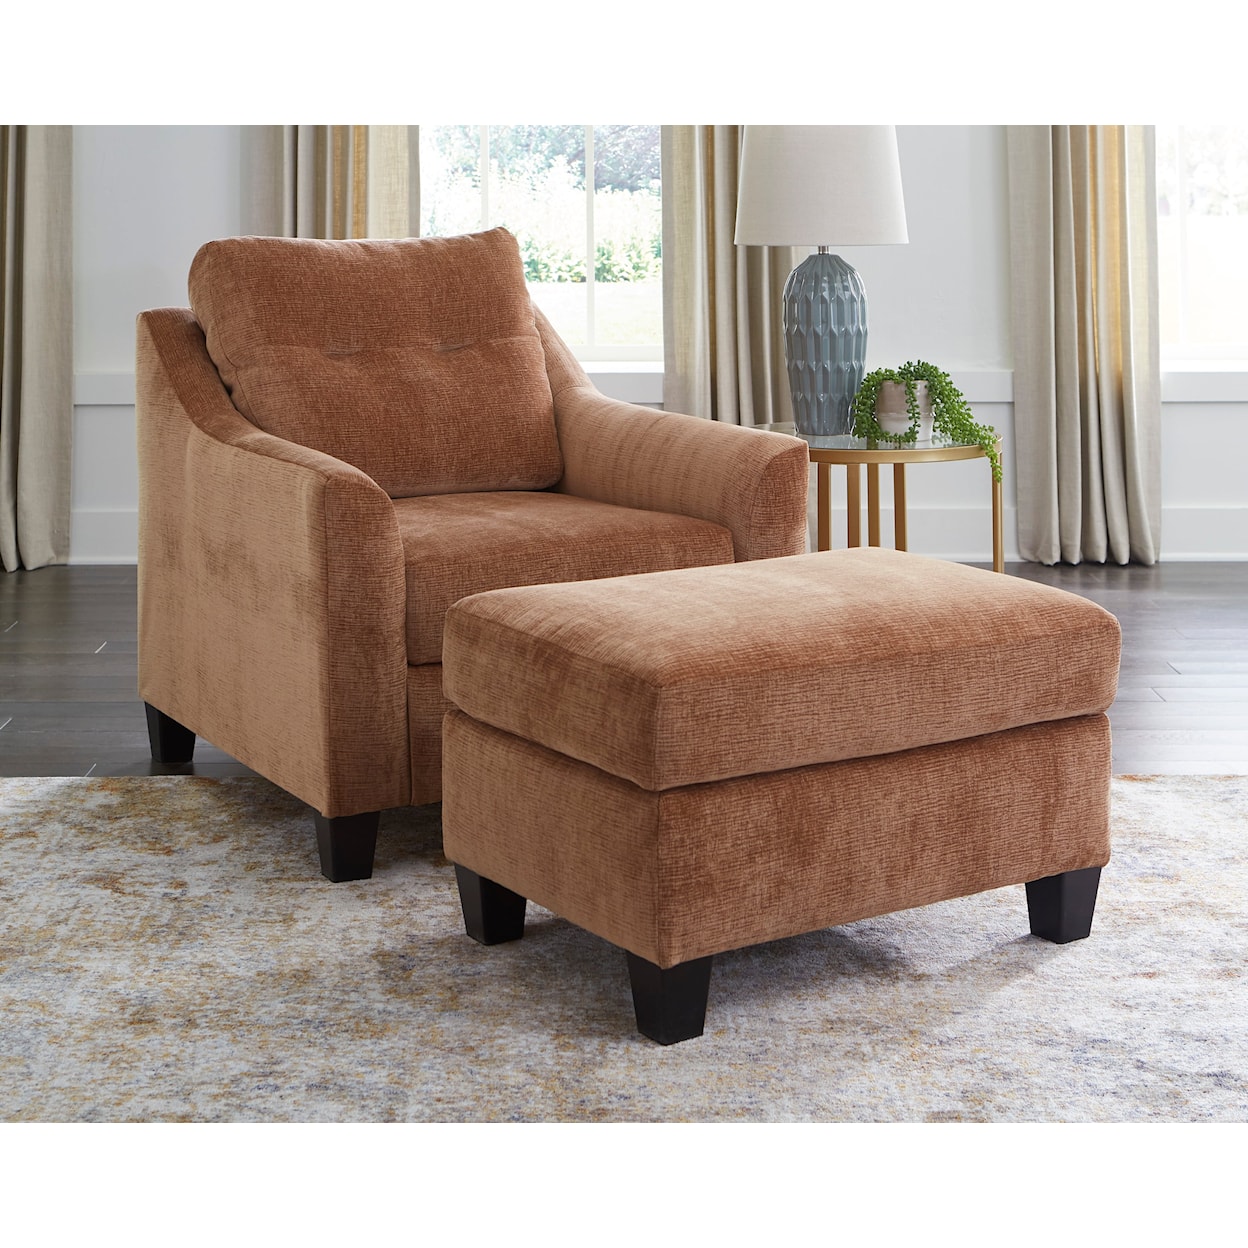 Benchcraft Amity Bay Chair And Ottoman